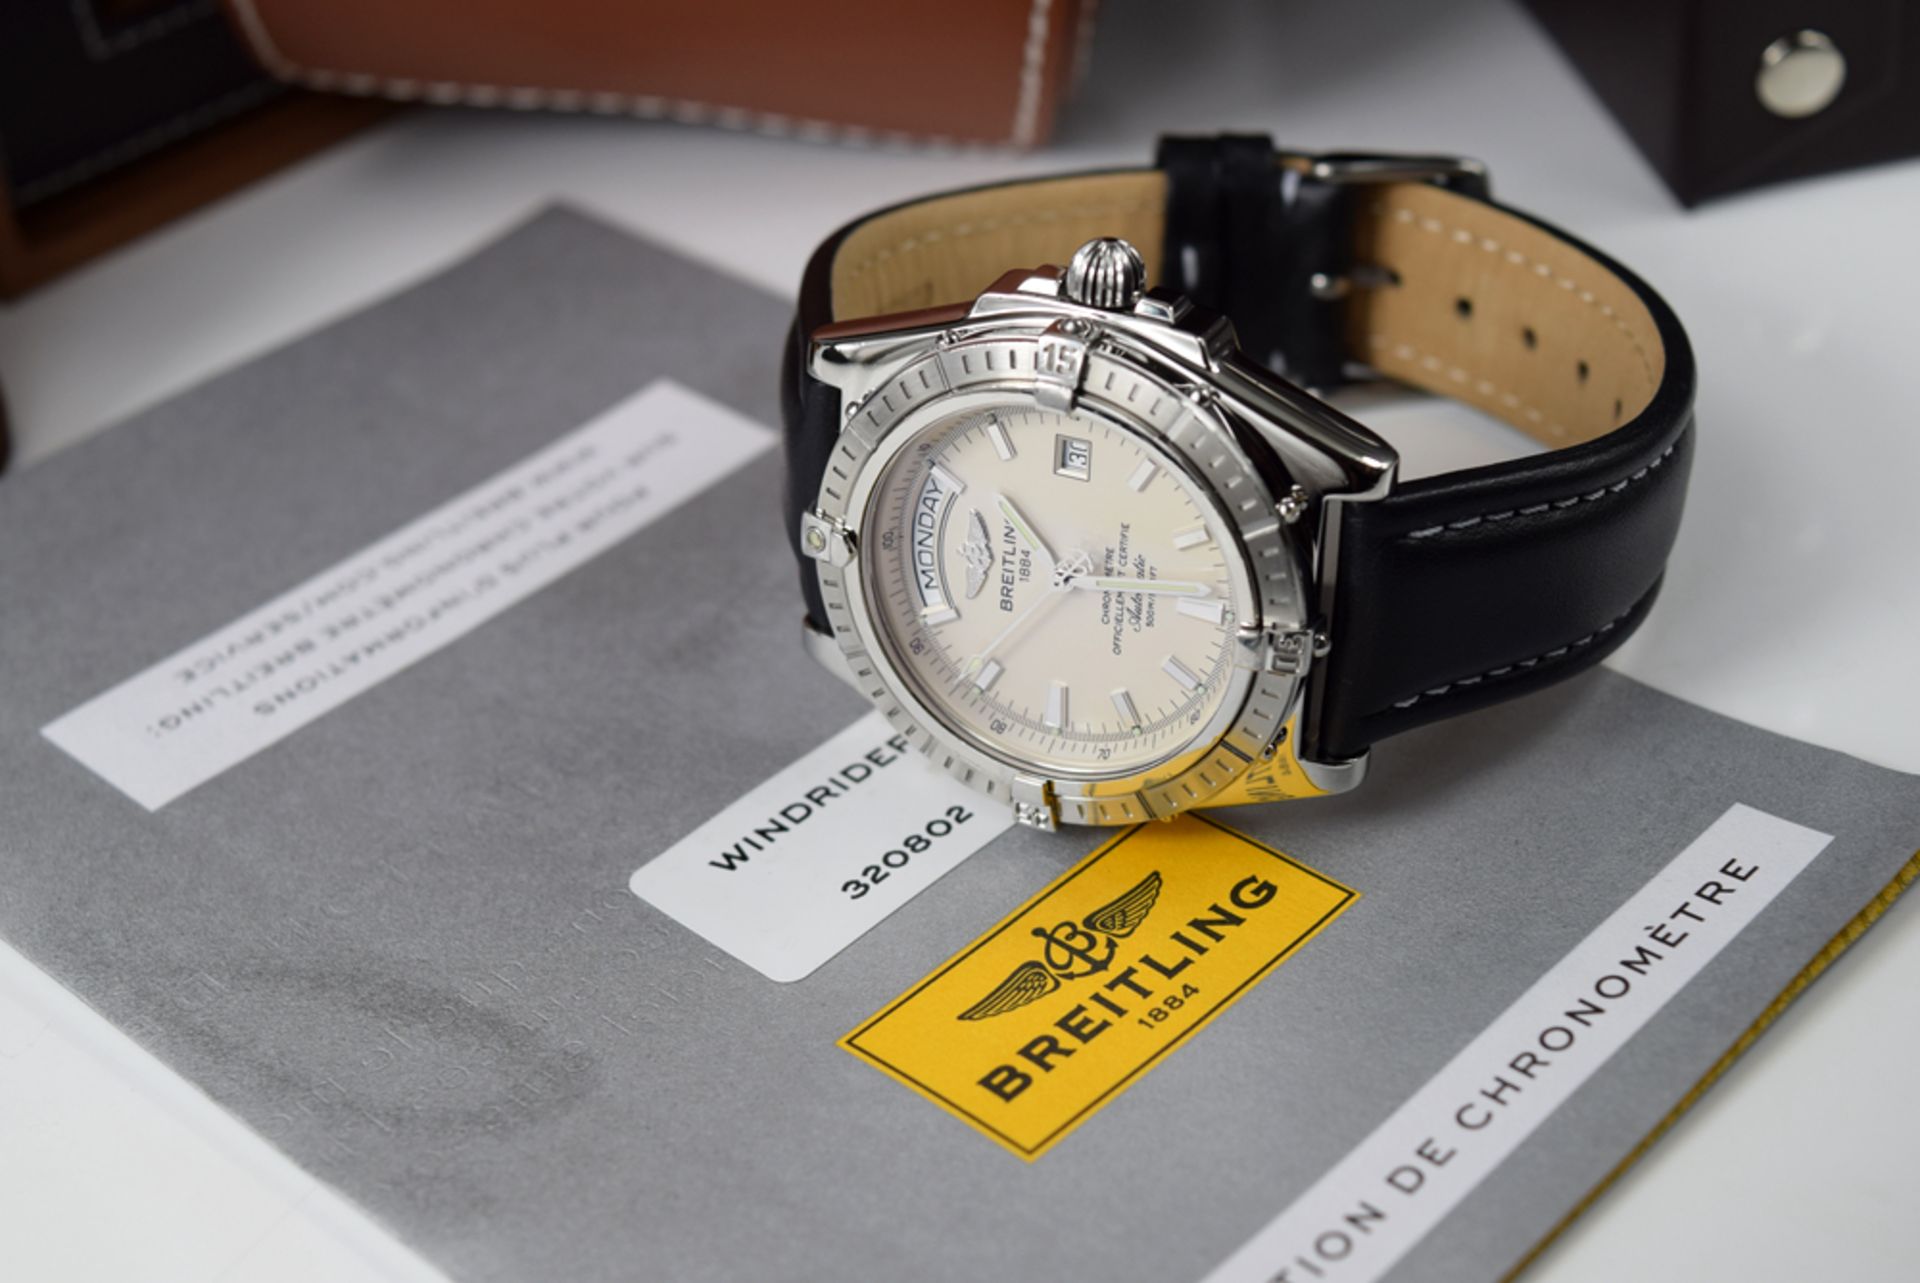 BREITLING 'DAY-DATE' WINDRIDER - STEEL (A45355) - Image 7 of 7